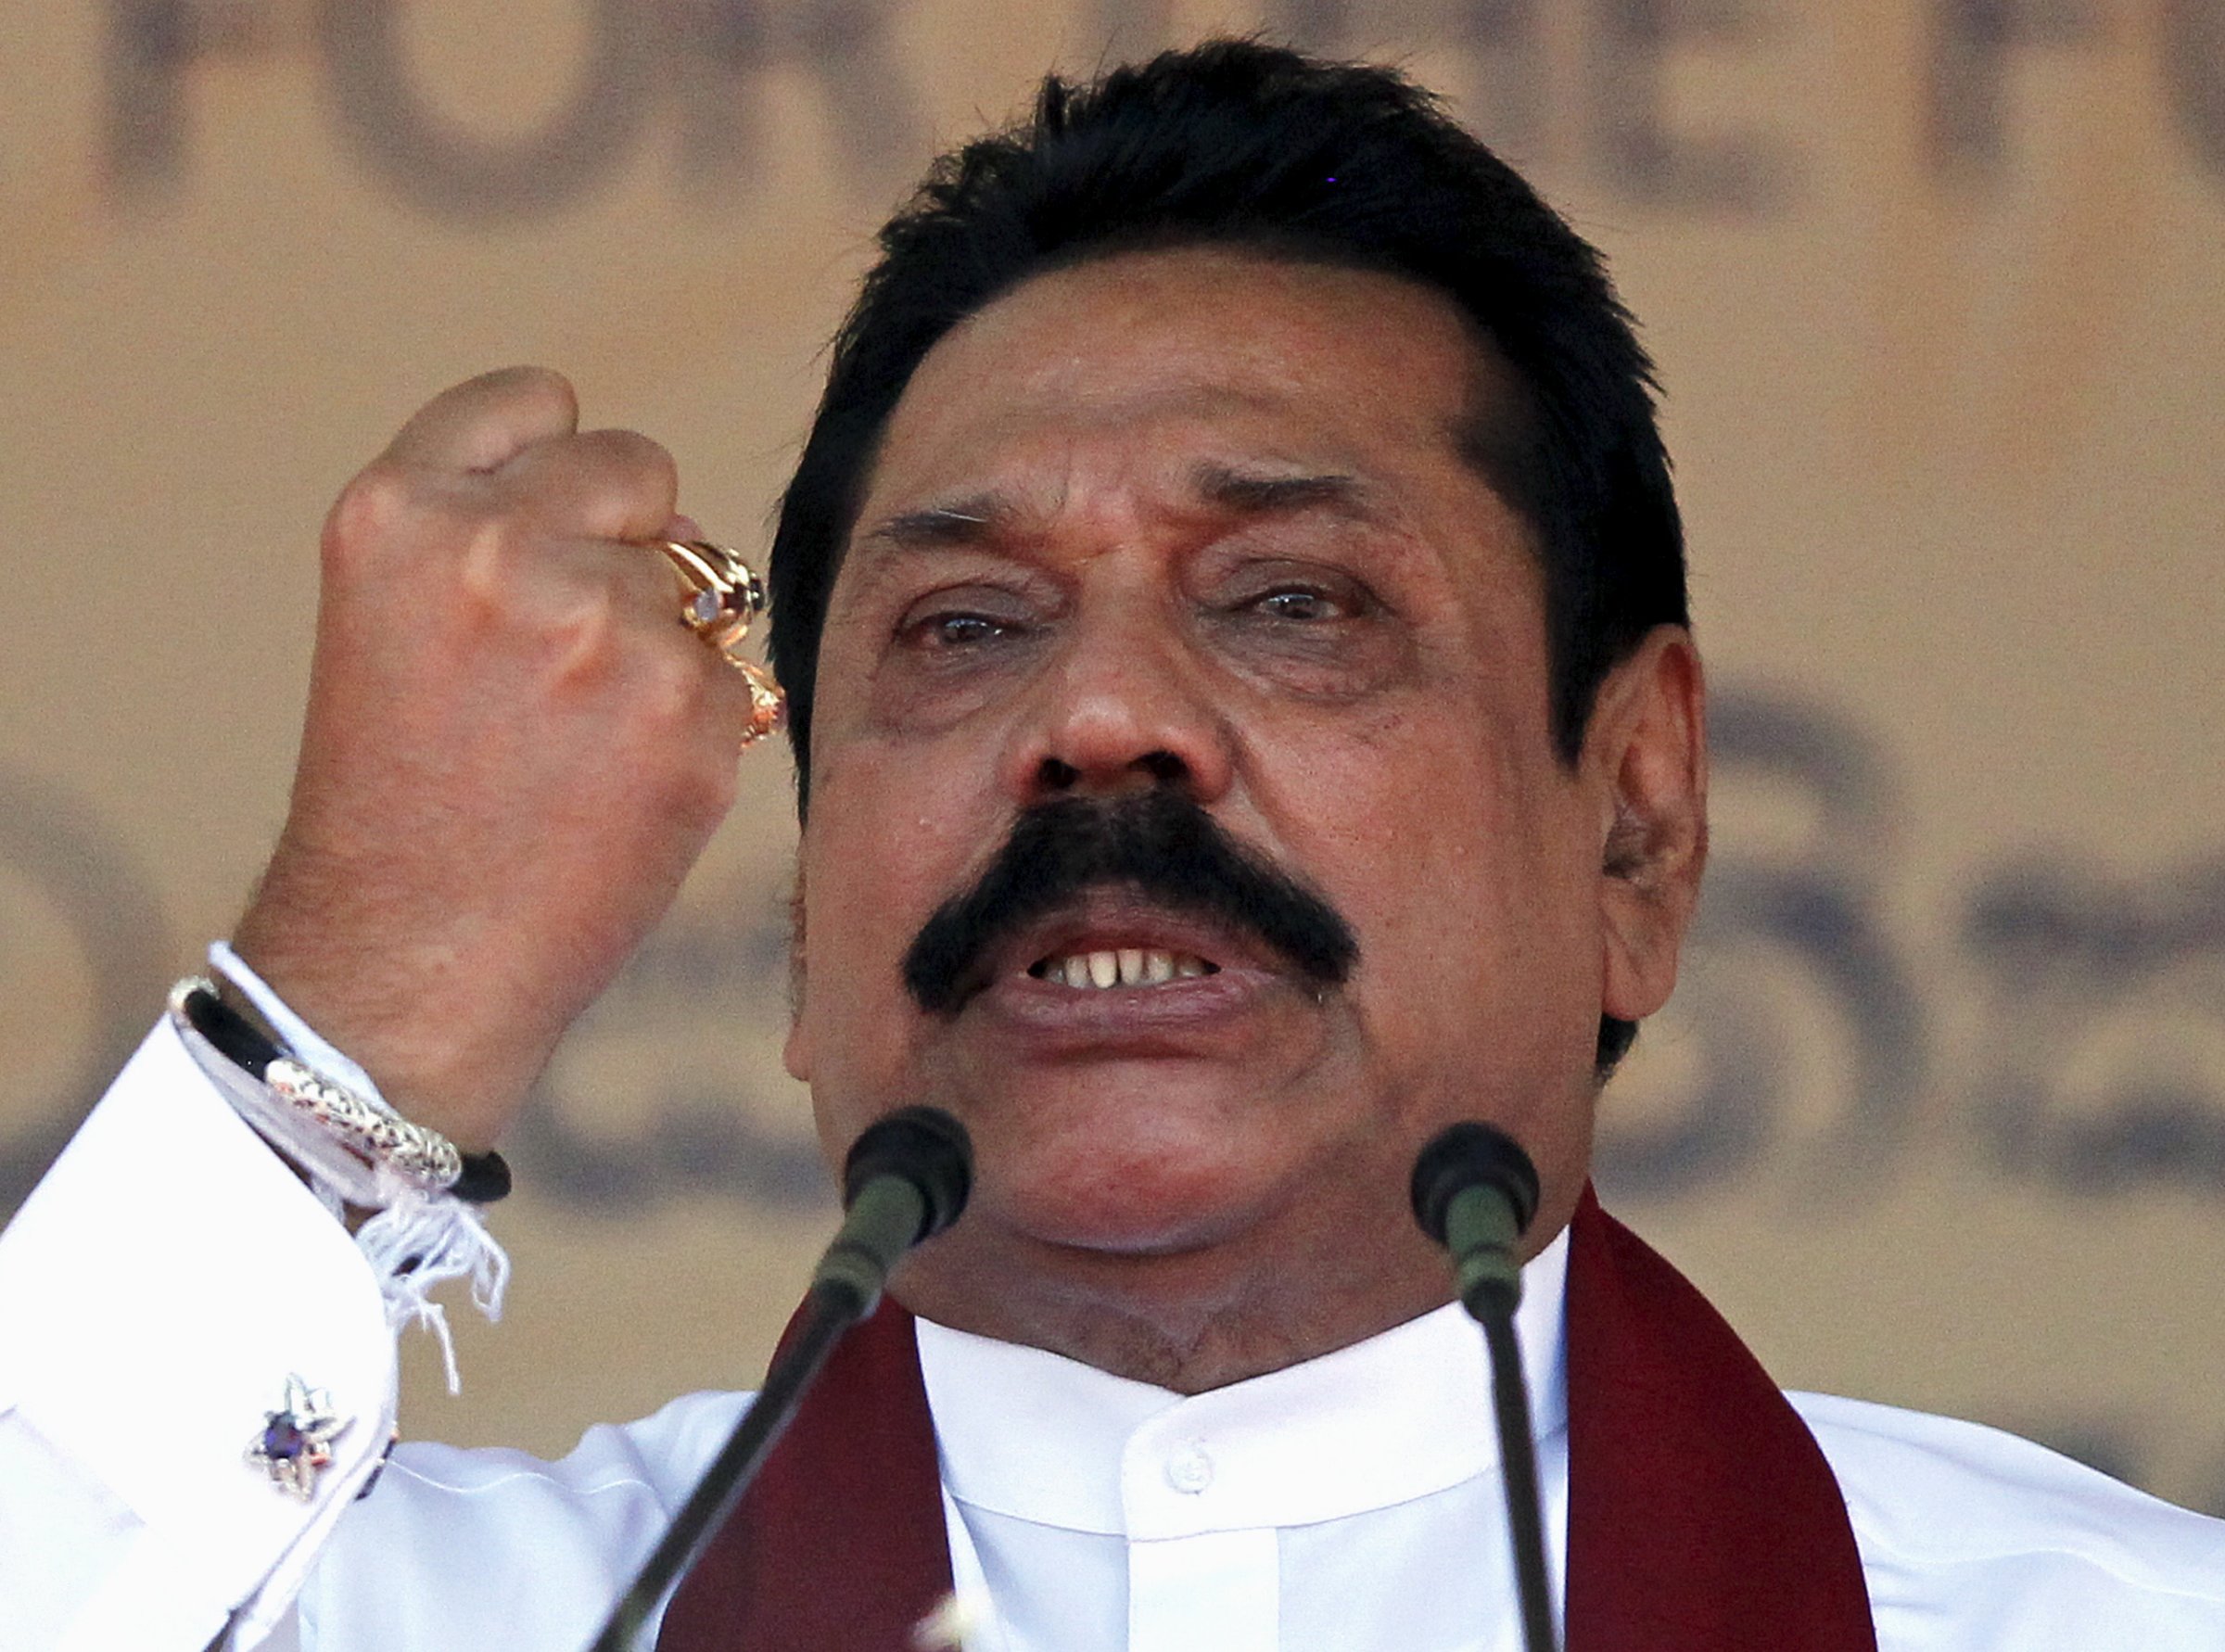 Sri Lanka's former president Rajapaksa, who is contesting in the upcoming general election, speaks during the launch ceremony of his manifesto, in Colombo